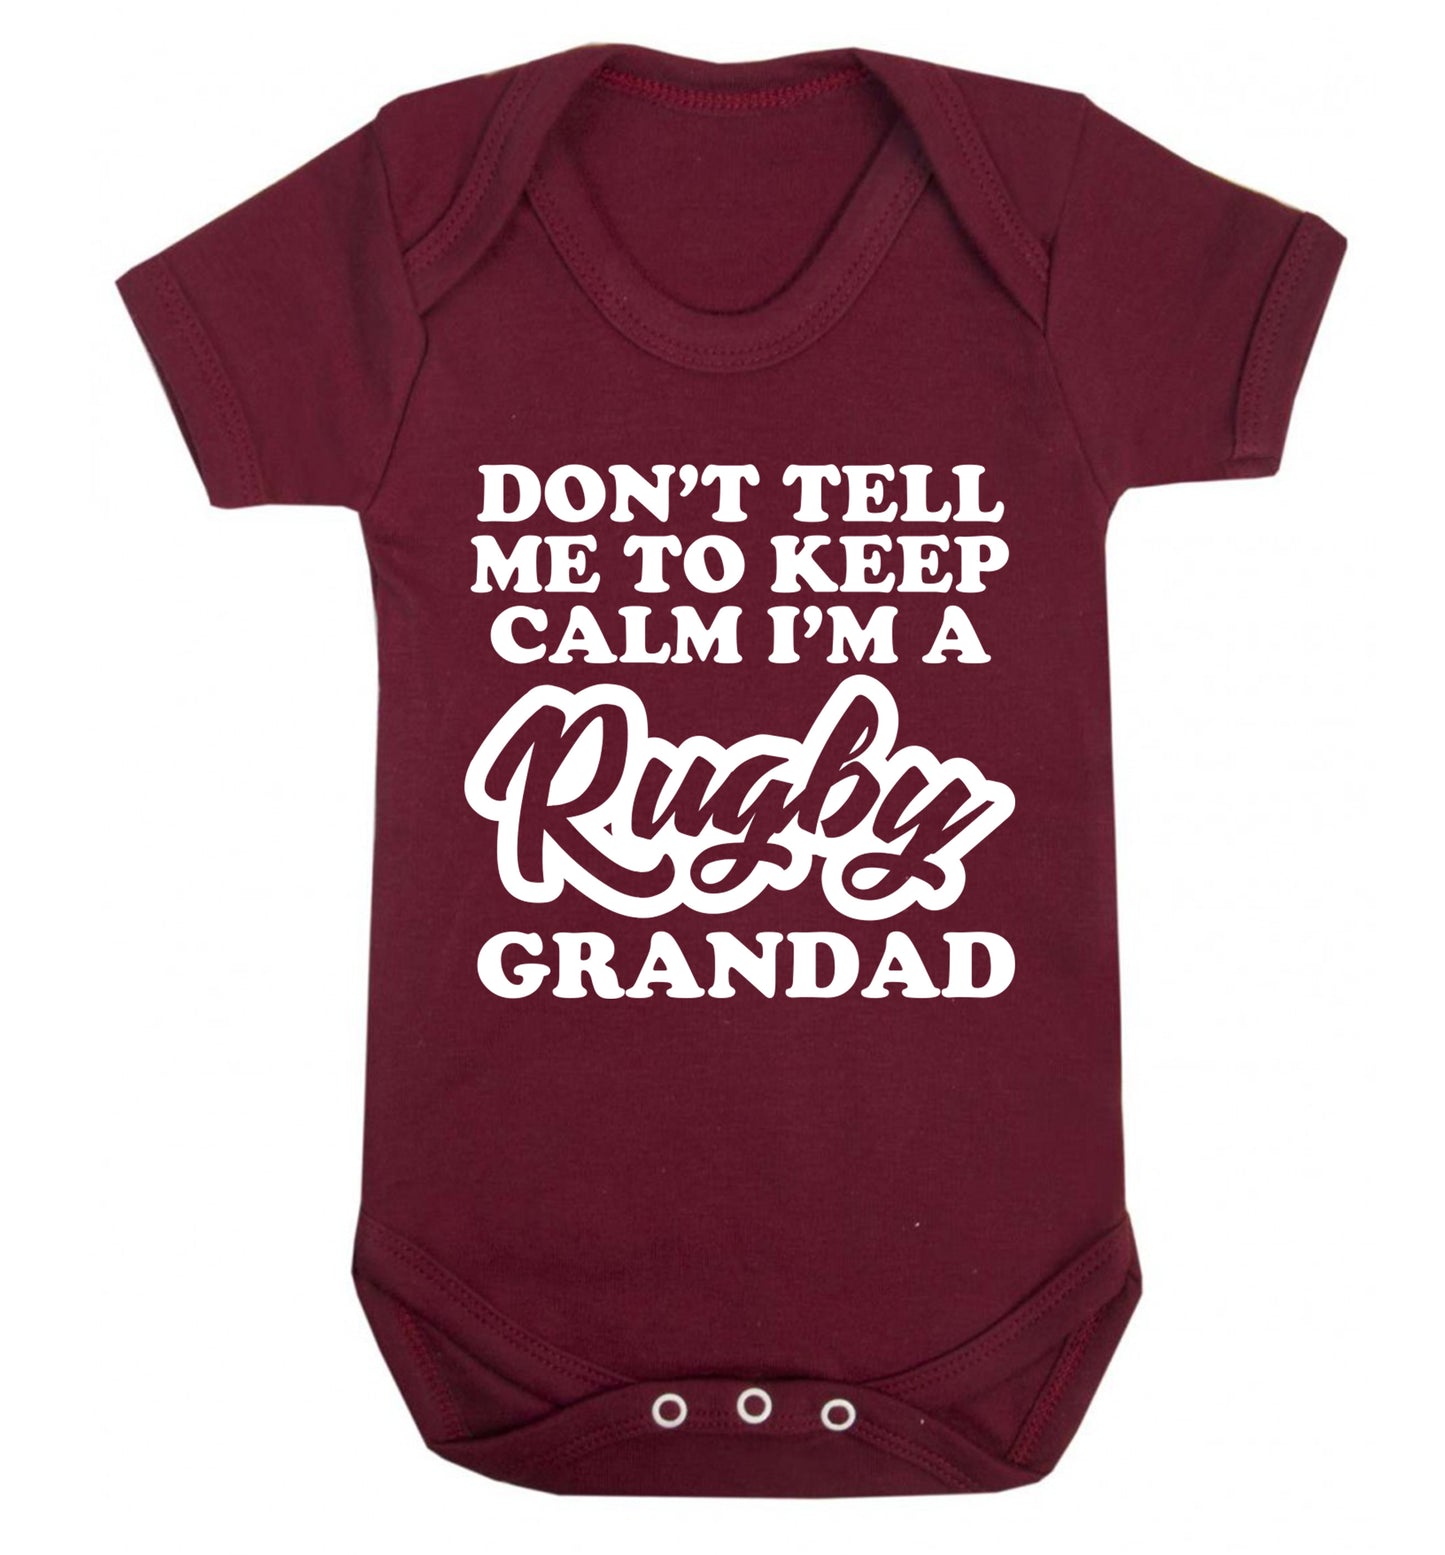 Don't tell me to keep calm I'm a rugby dad Baby Vest maroon 18-24 months